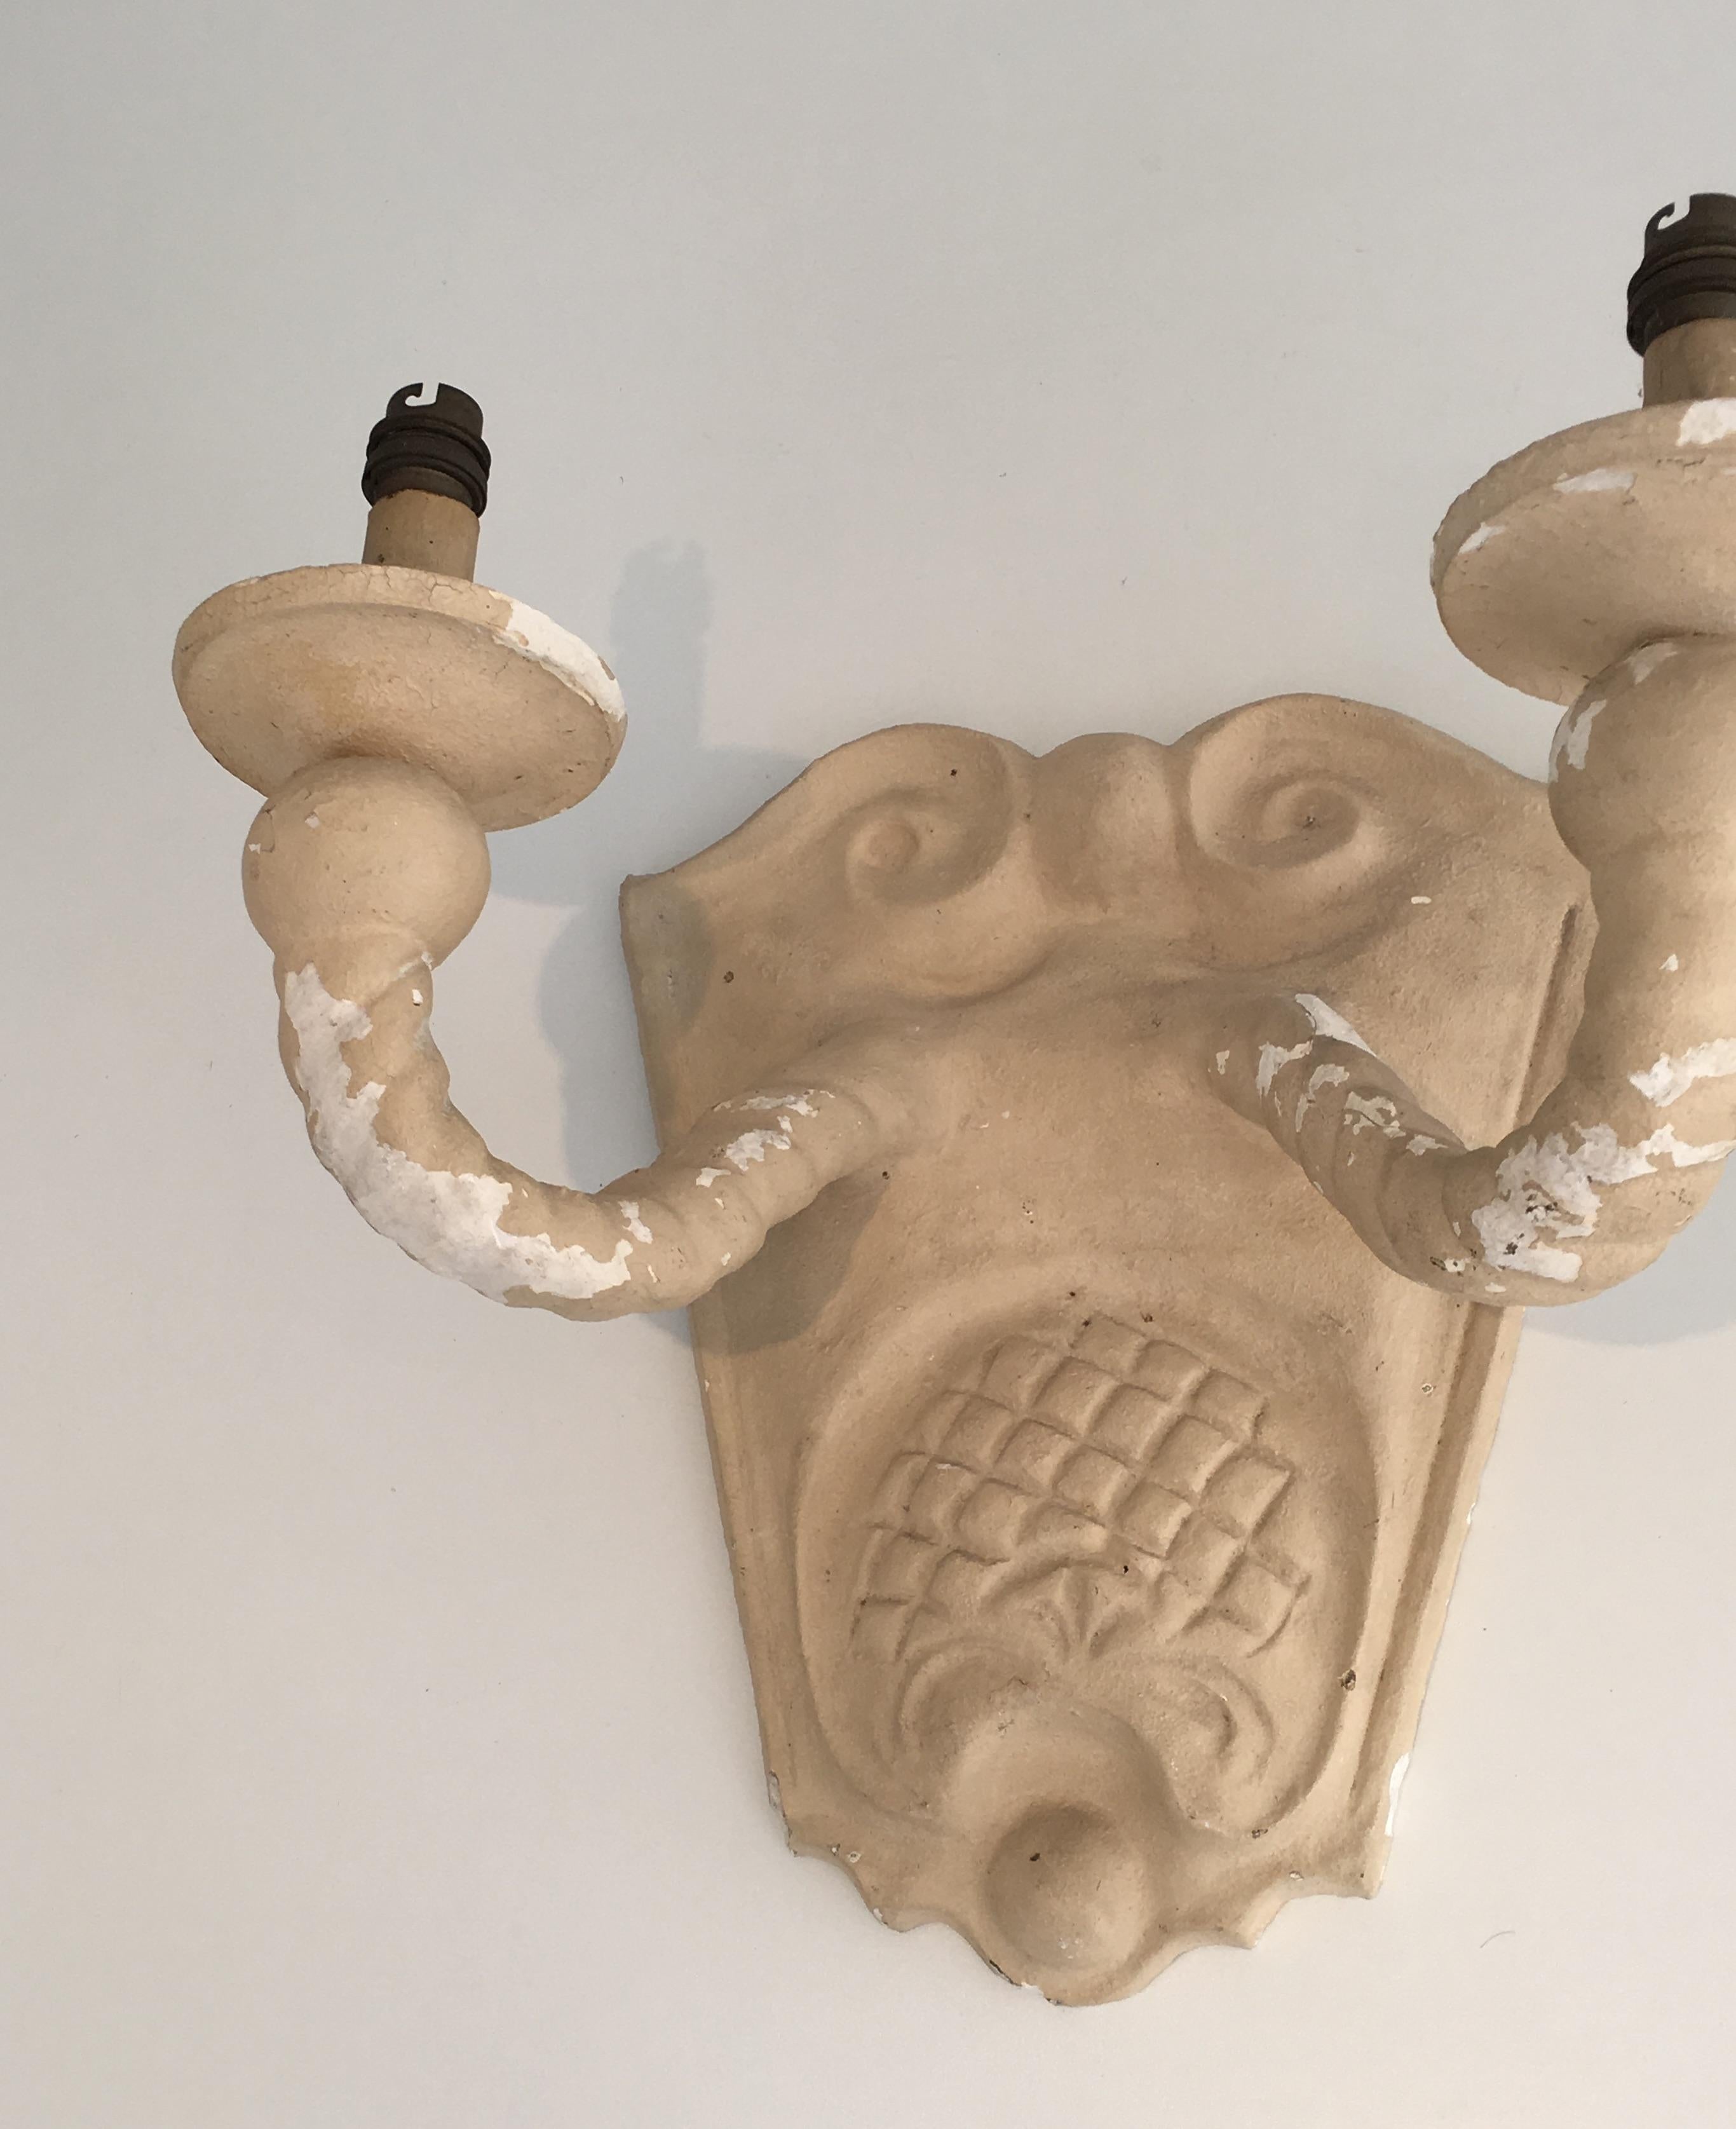 Pair of Plaster Wall Sconces, French, circa 1940 For Sale 8